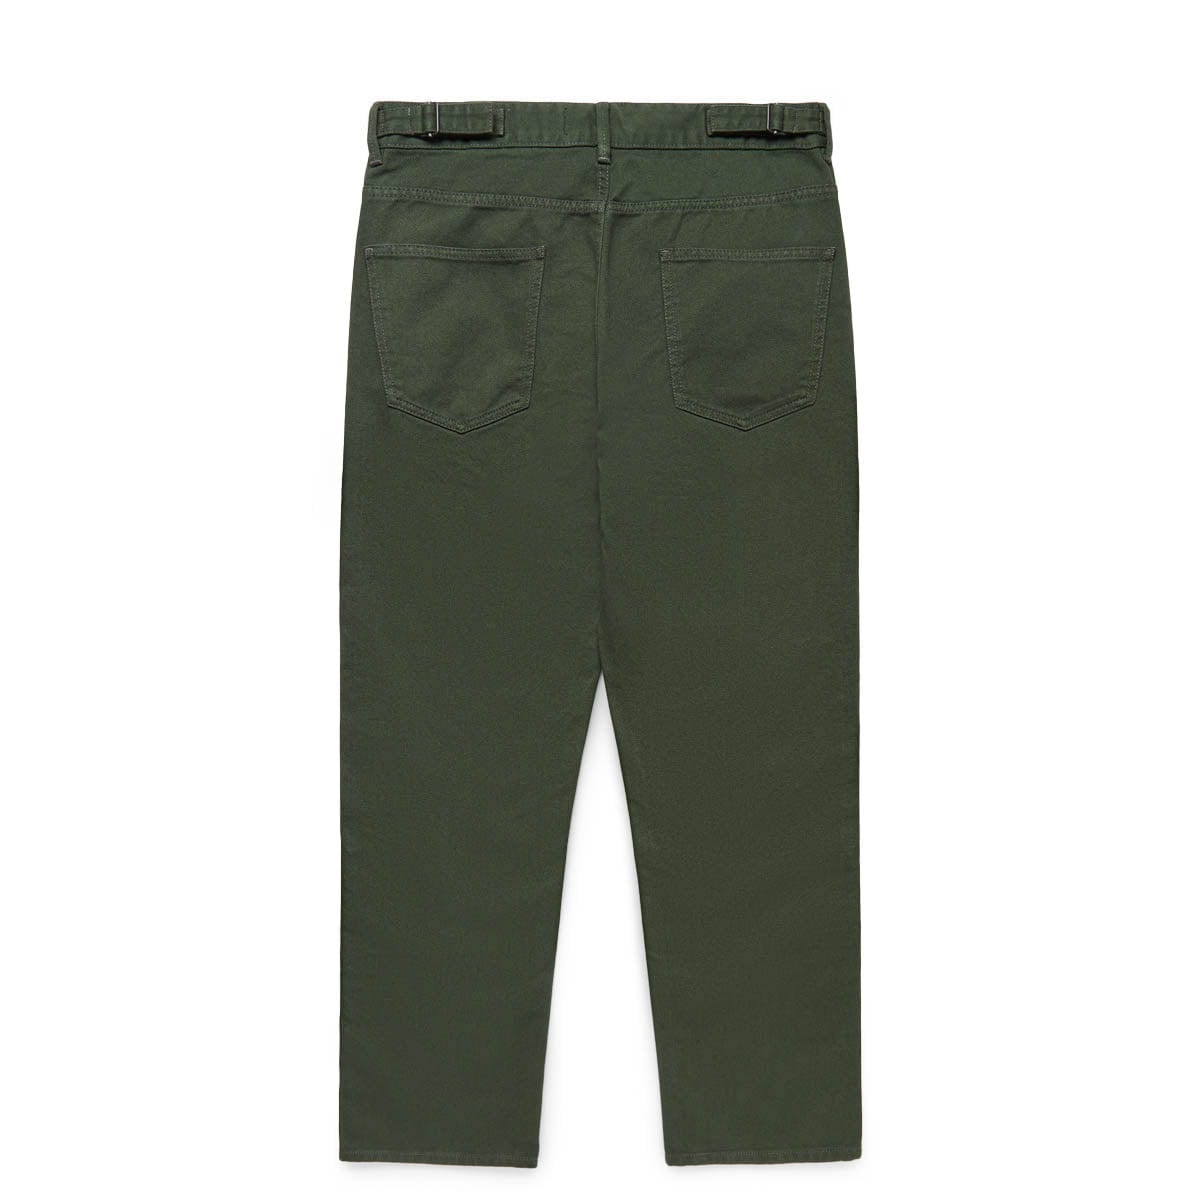 Curved 5 Pocket Pants - LEMAIRE - Purchase on Ventis.